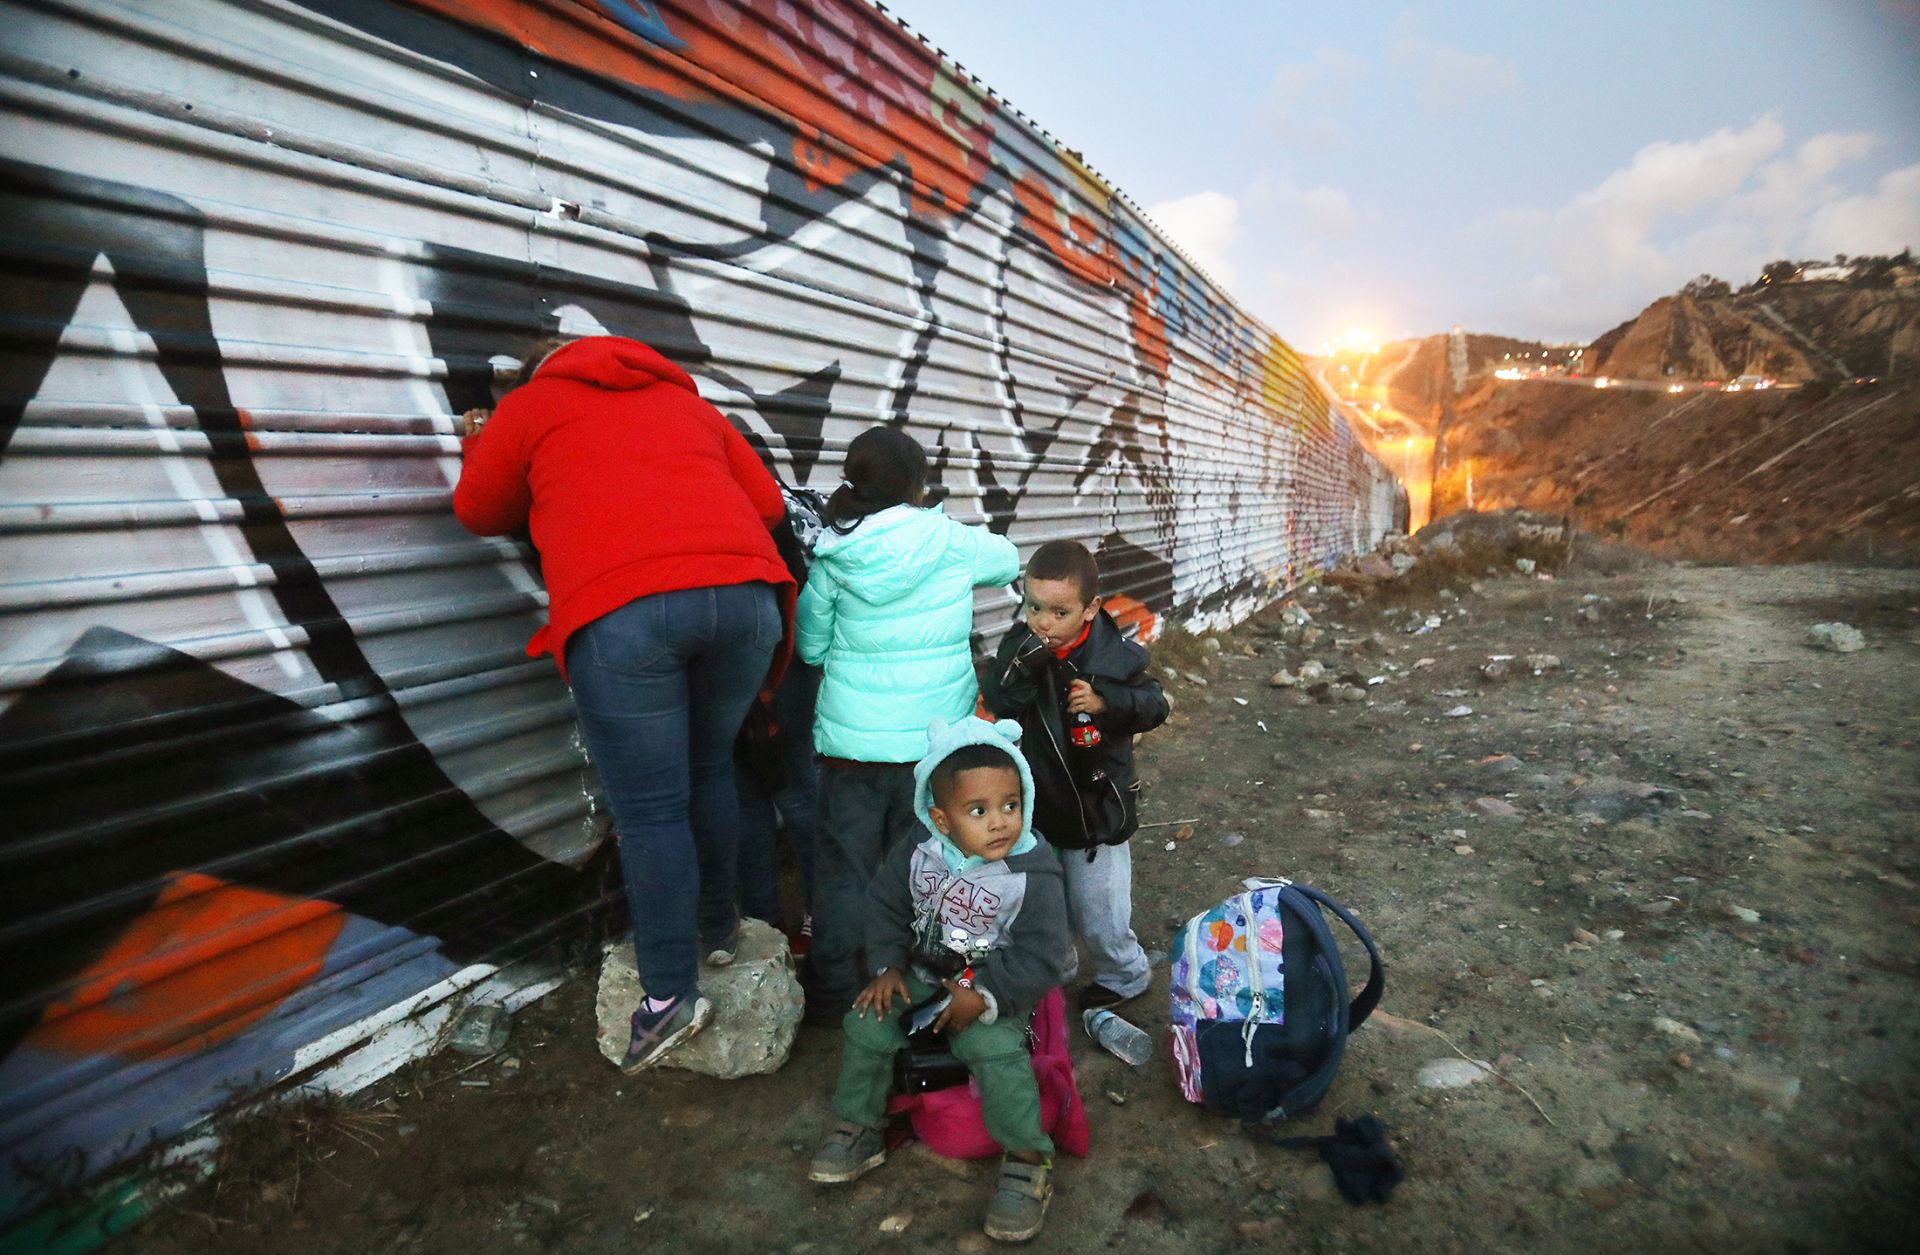 A picture showing Honduran migrants gathering on the Mexican side of the U.S.-Mexico border fence near Tijuana after unsuccessfully attempting to cross into the United States, Dec 1. 